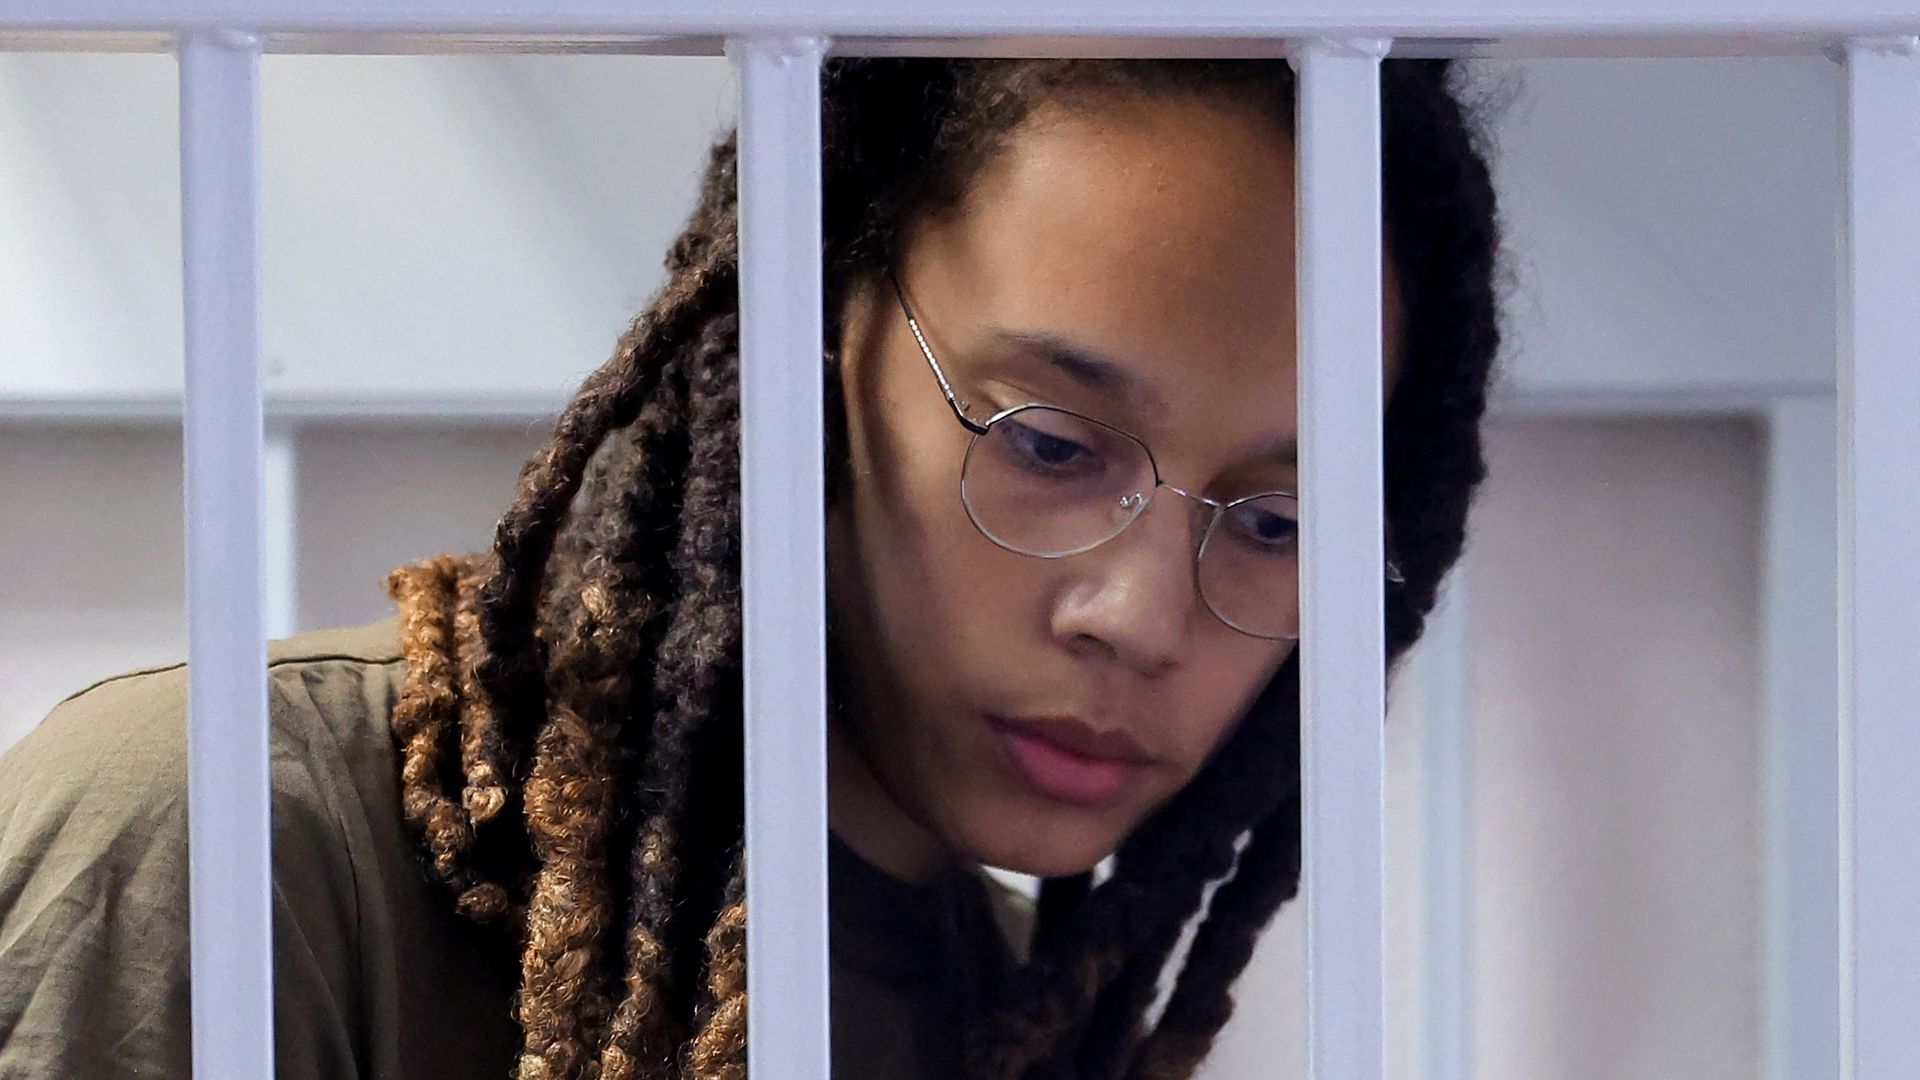 US basketball player Brittney Griner stands in a defendants' cage before a court hearing during her trial on charges of drug smuggling, in Khimki, outside Moscow on August 2.